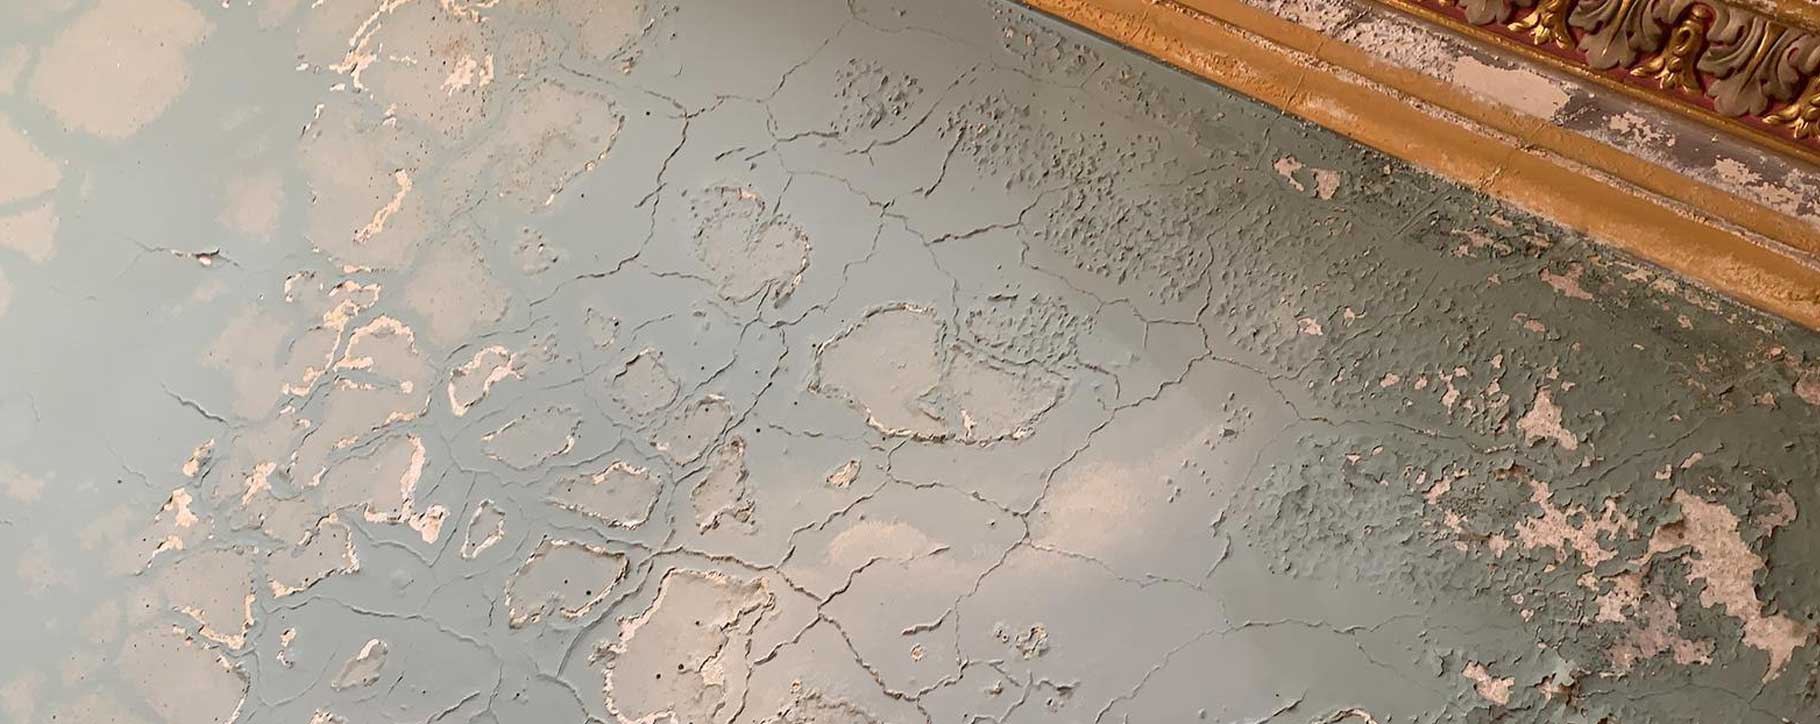 cracked and flaking paint on westonbirt school ceiling